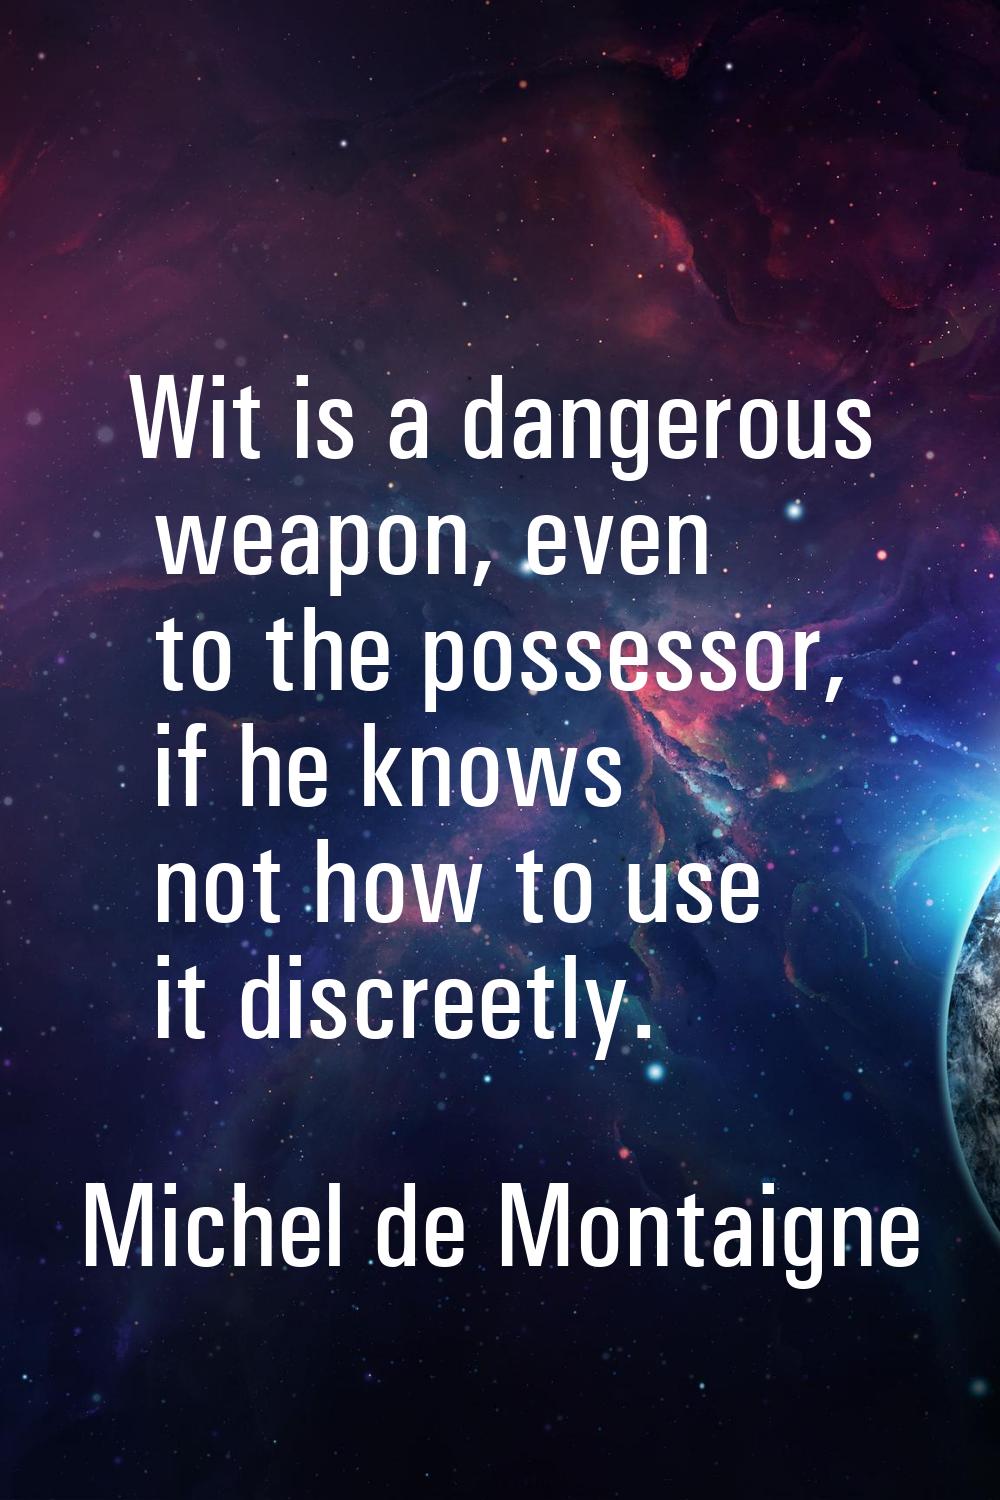 Wit is a dangerous weapon, even to the possessor, if he knows not how to use it discreetly.